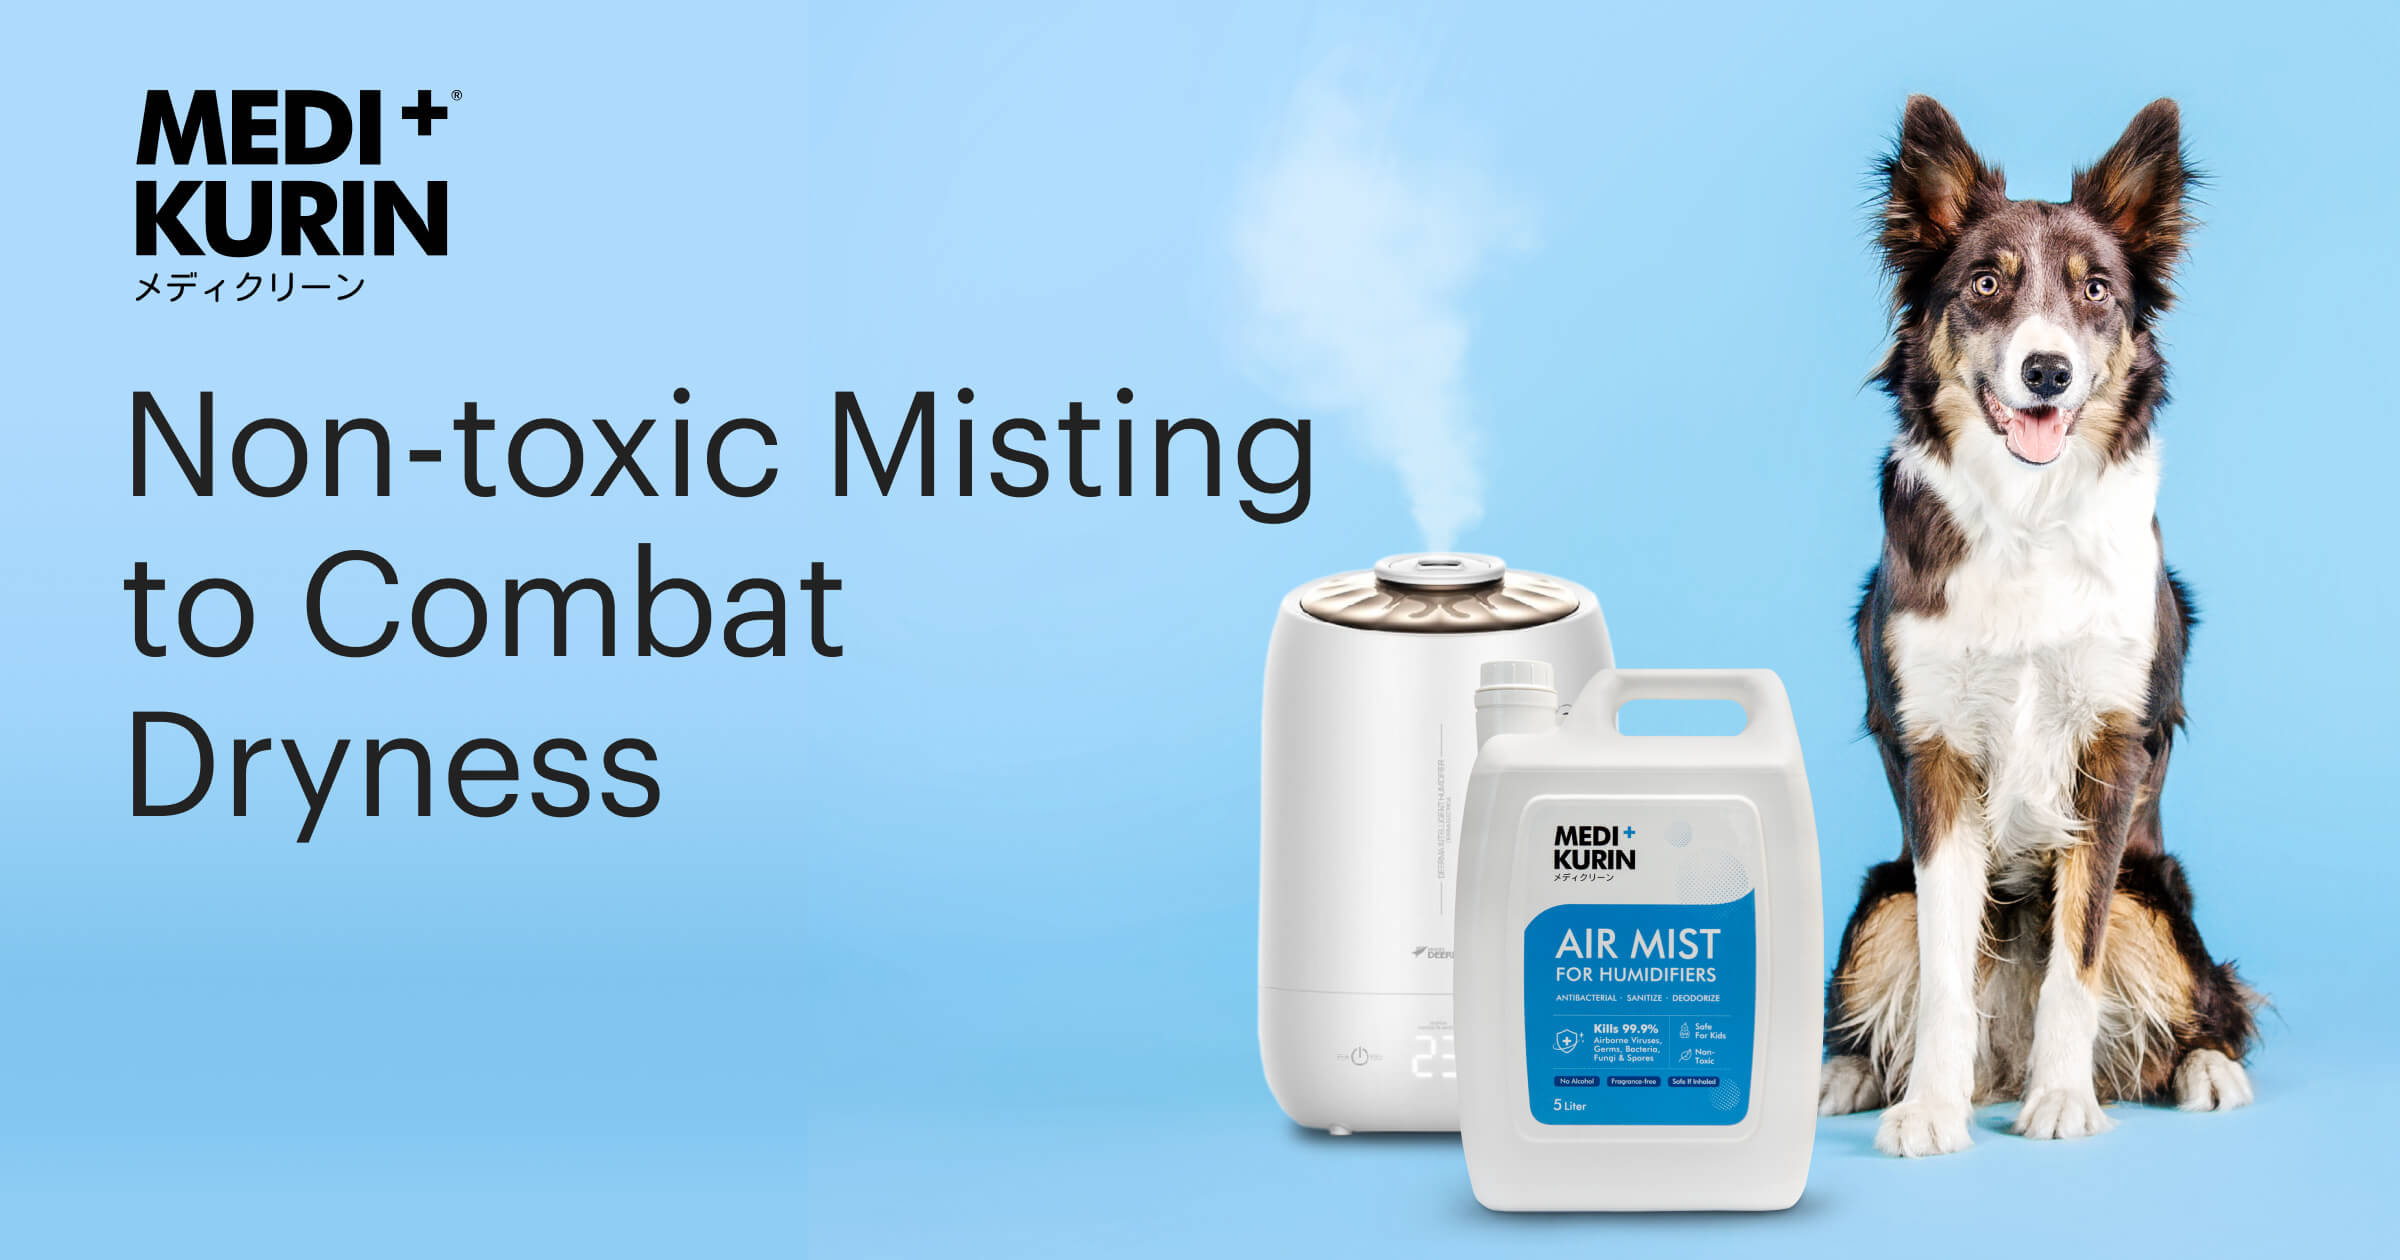 MEDIKURIN® Air Mist for Humidifiers